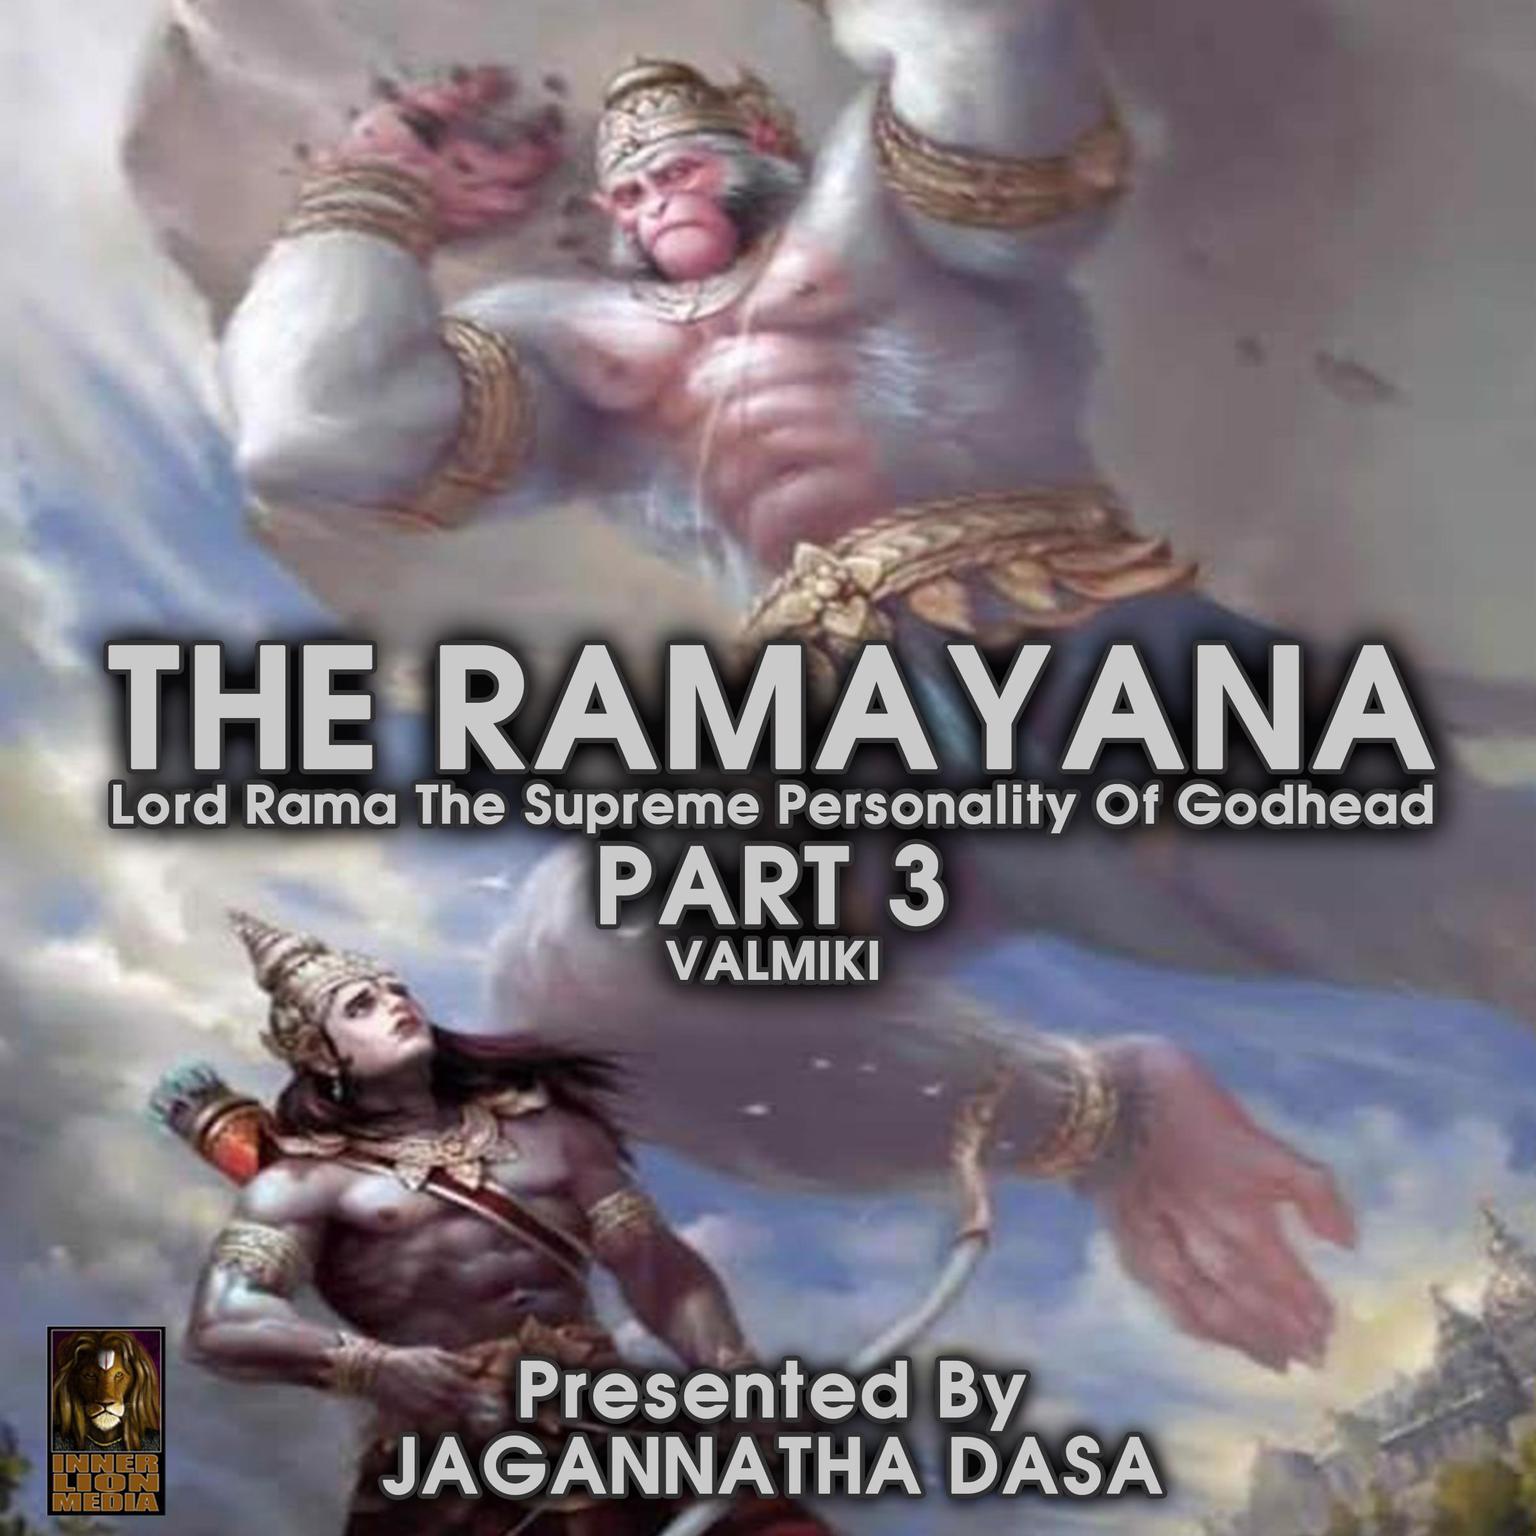 The Ramayana Lord Rama The Supreme Personality Of Godhead - Part 3 (Abridged) Audiobook, by Valmiki 